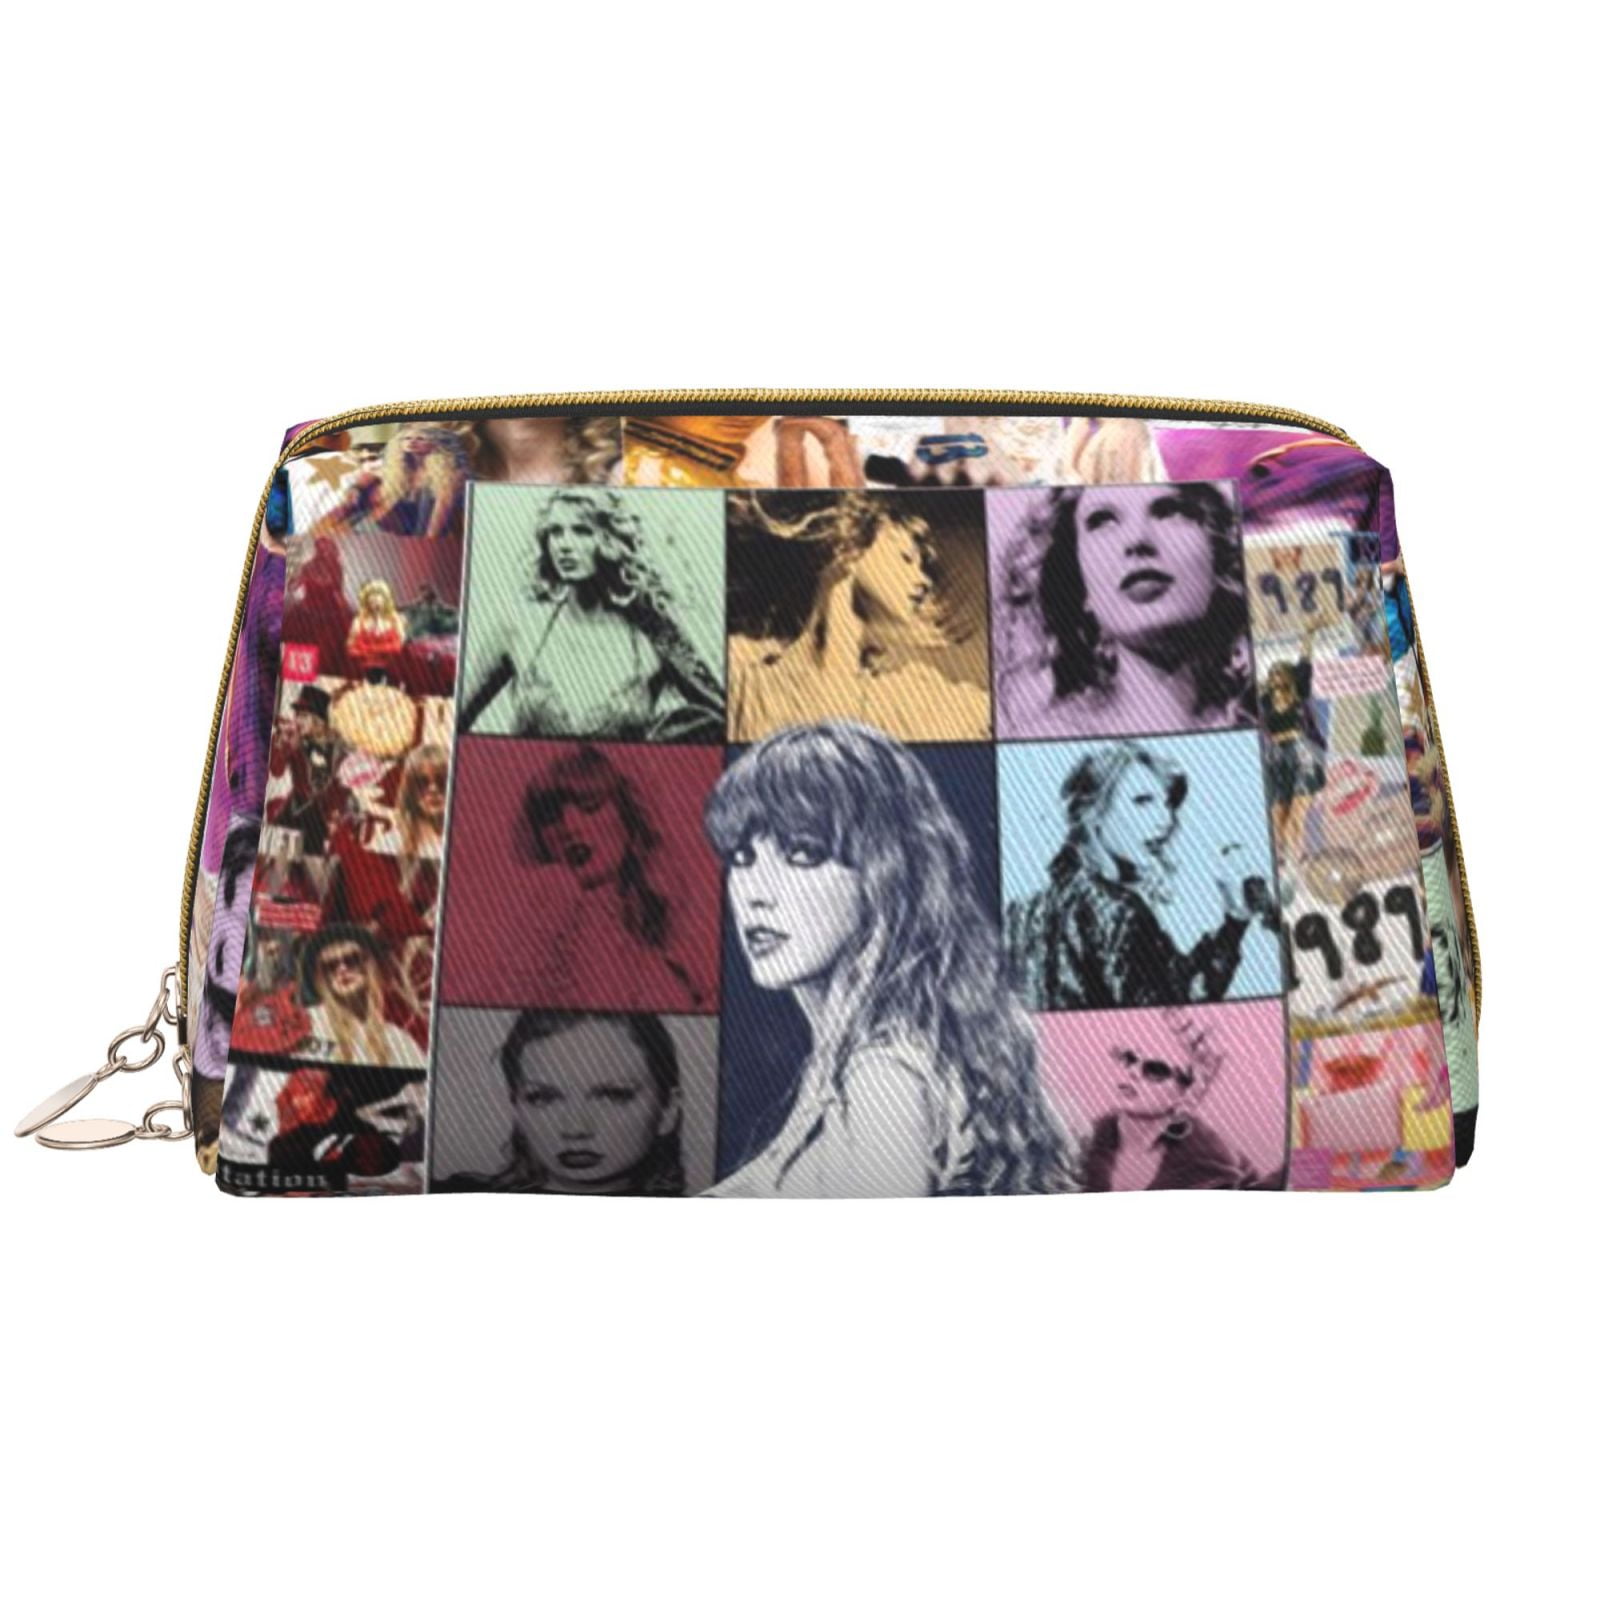 Taylor Swift Cosmetic Cases